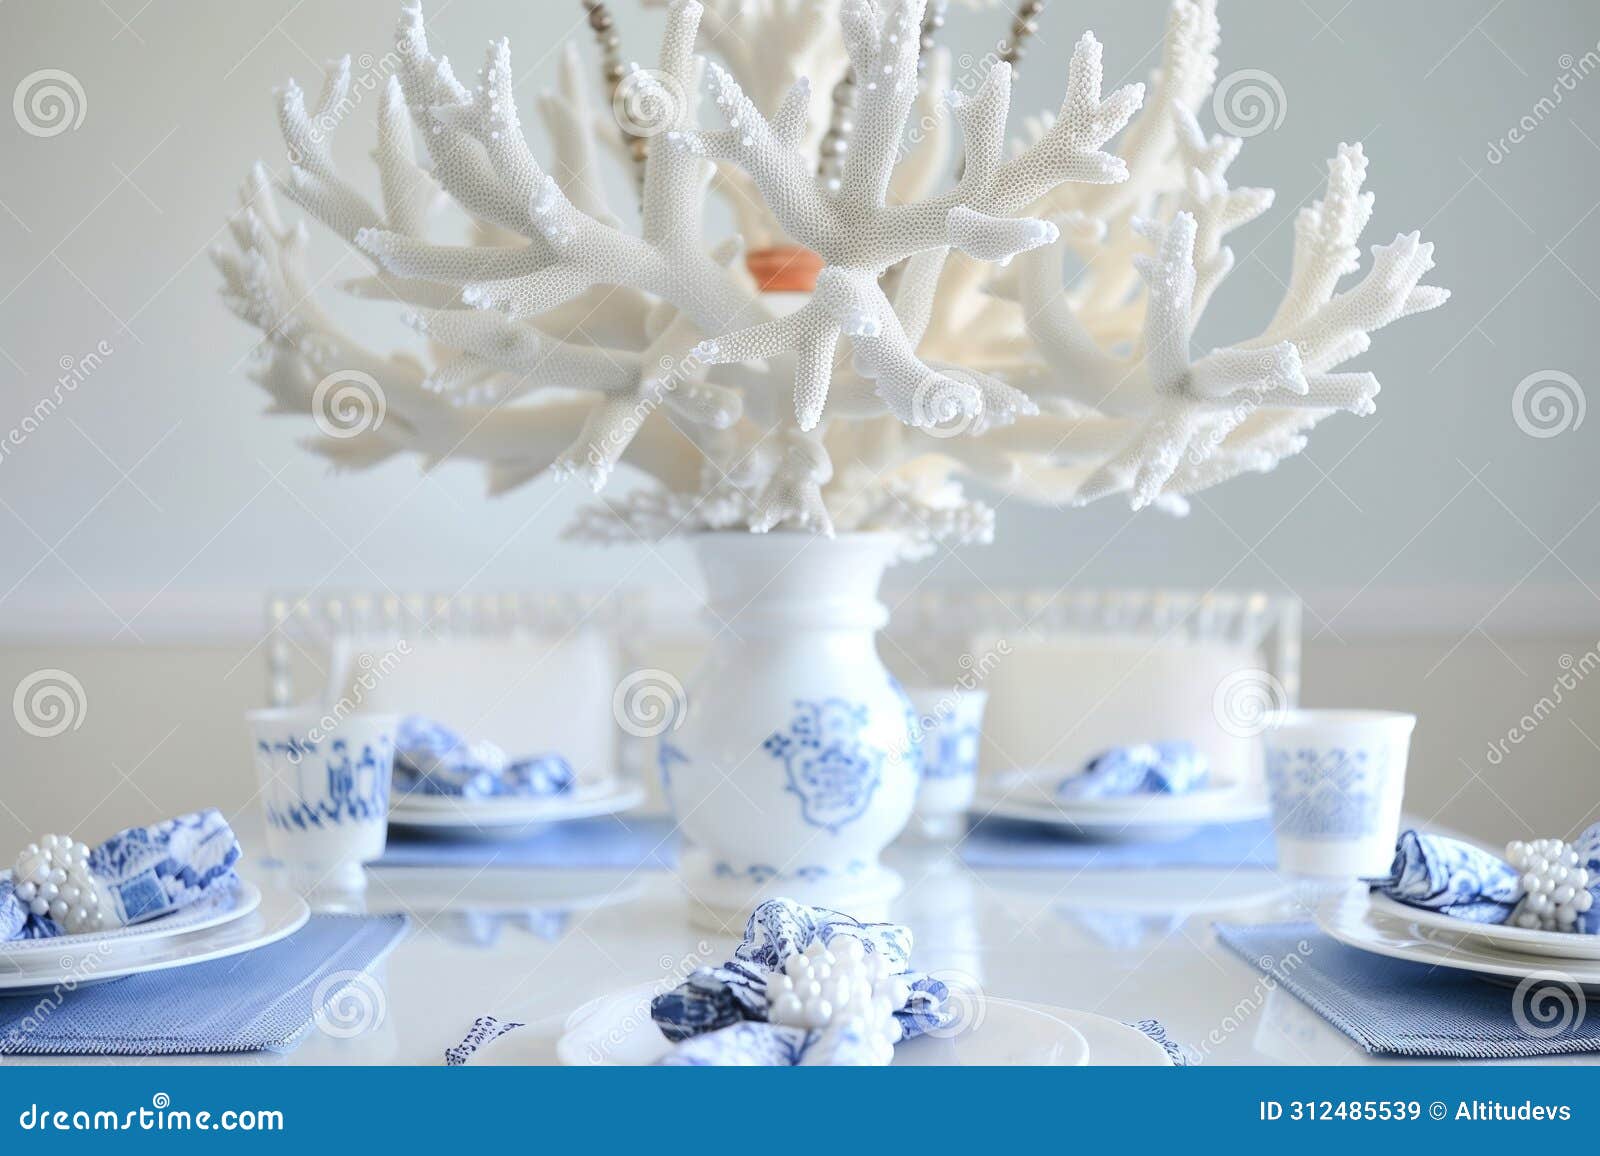 table with a white coral chandelier above, bluewhite porcelain, and pearl napkin rings